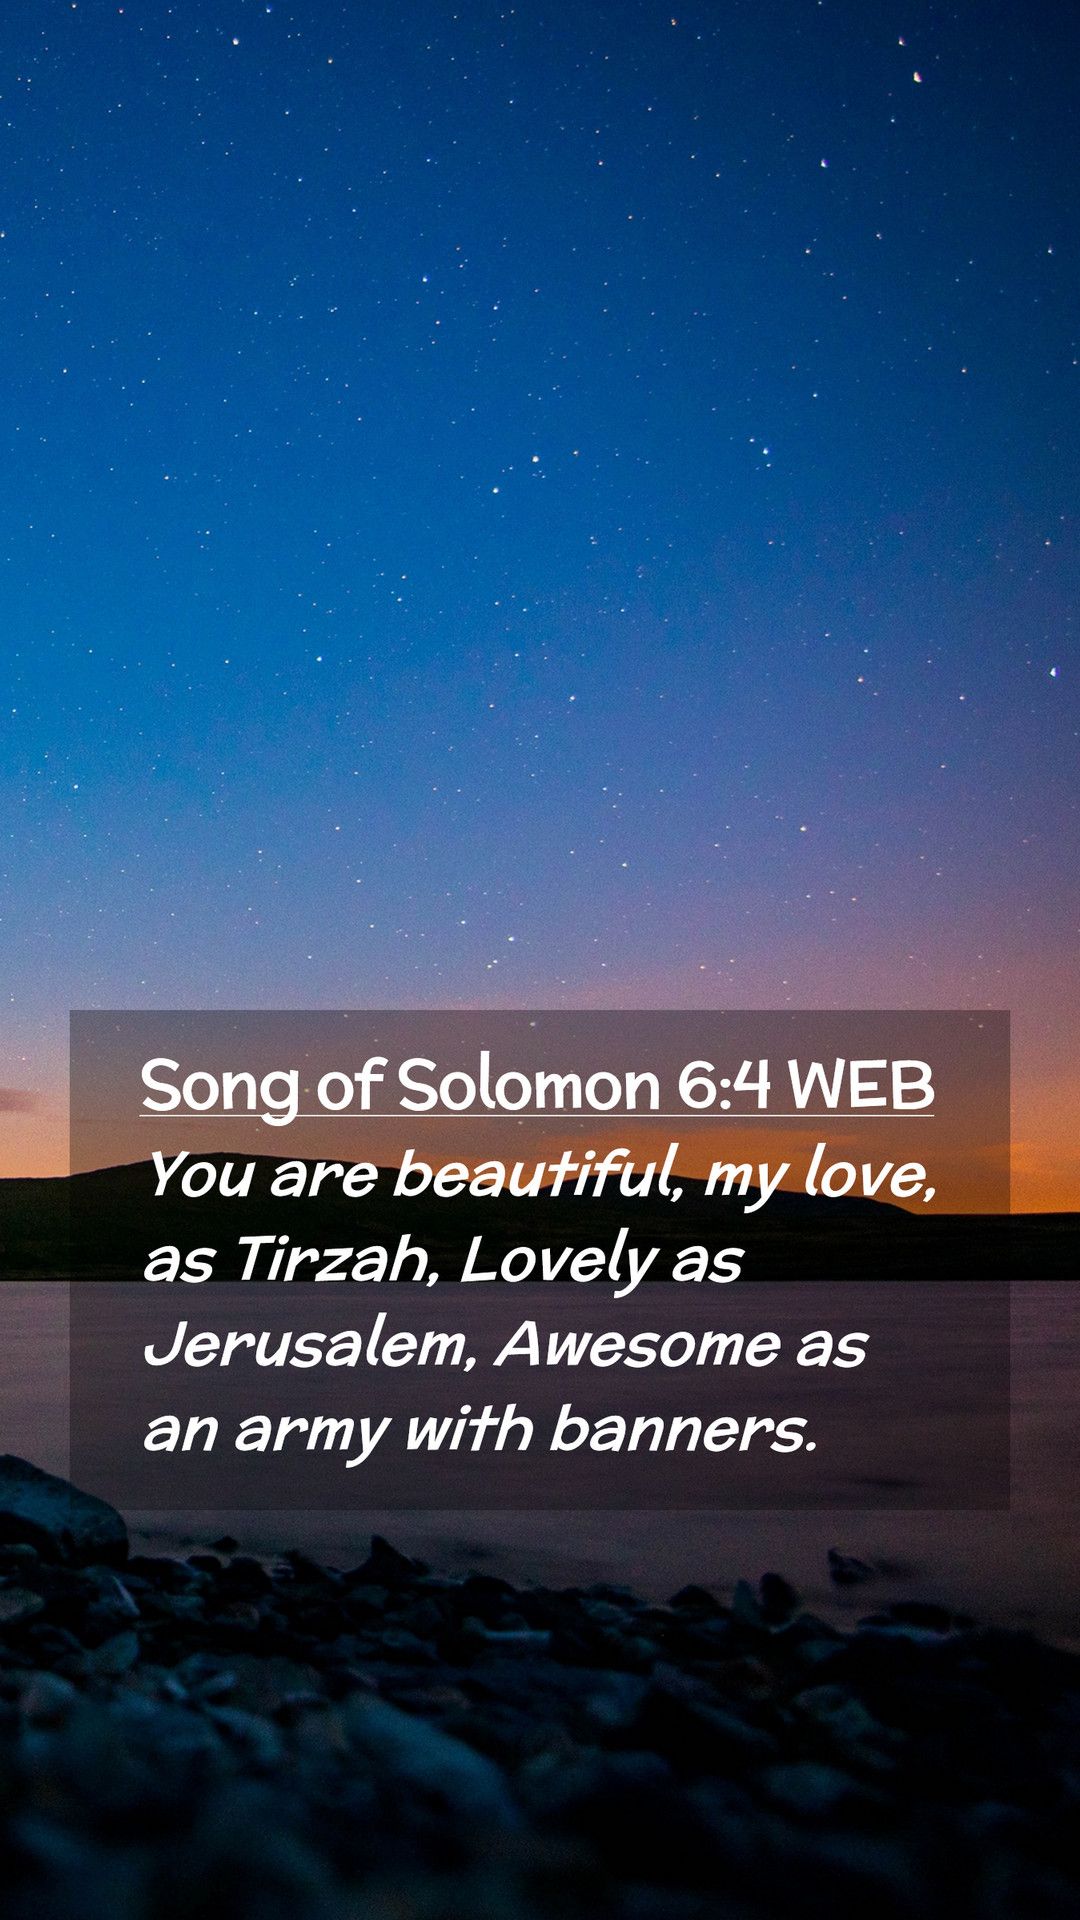 Song of Solomon 6:4 WEB Mobile Phone Wallpaper are beautiful, my love, as Tirzah, Lovely as